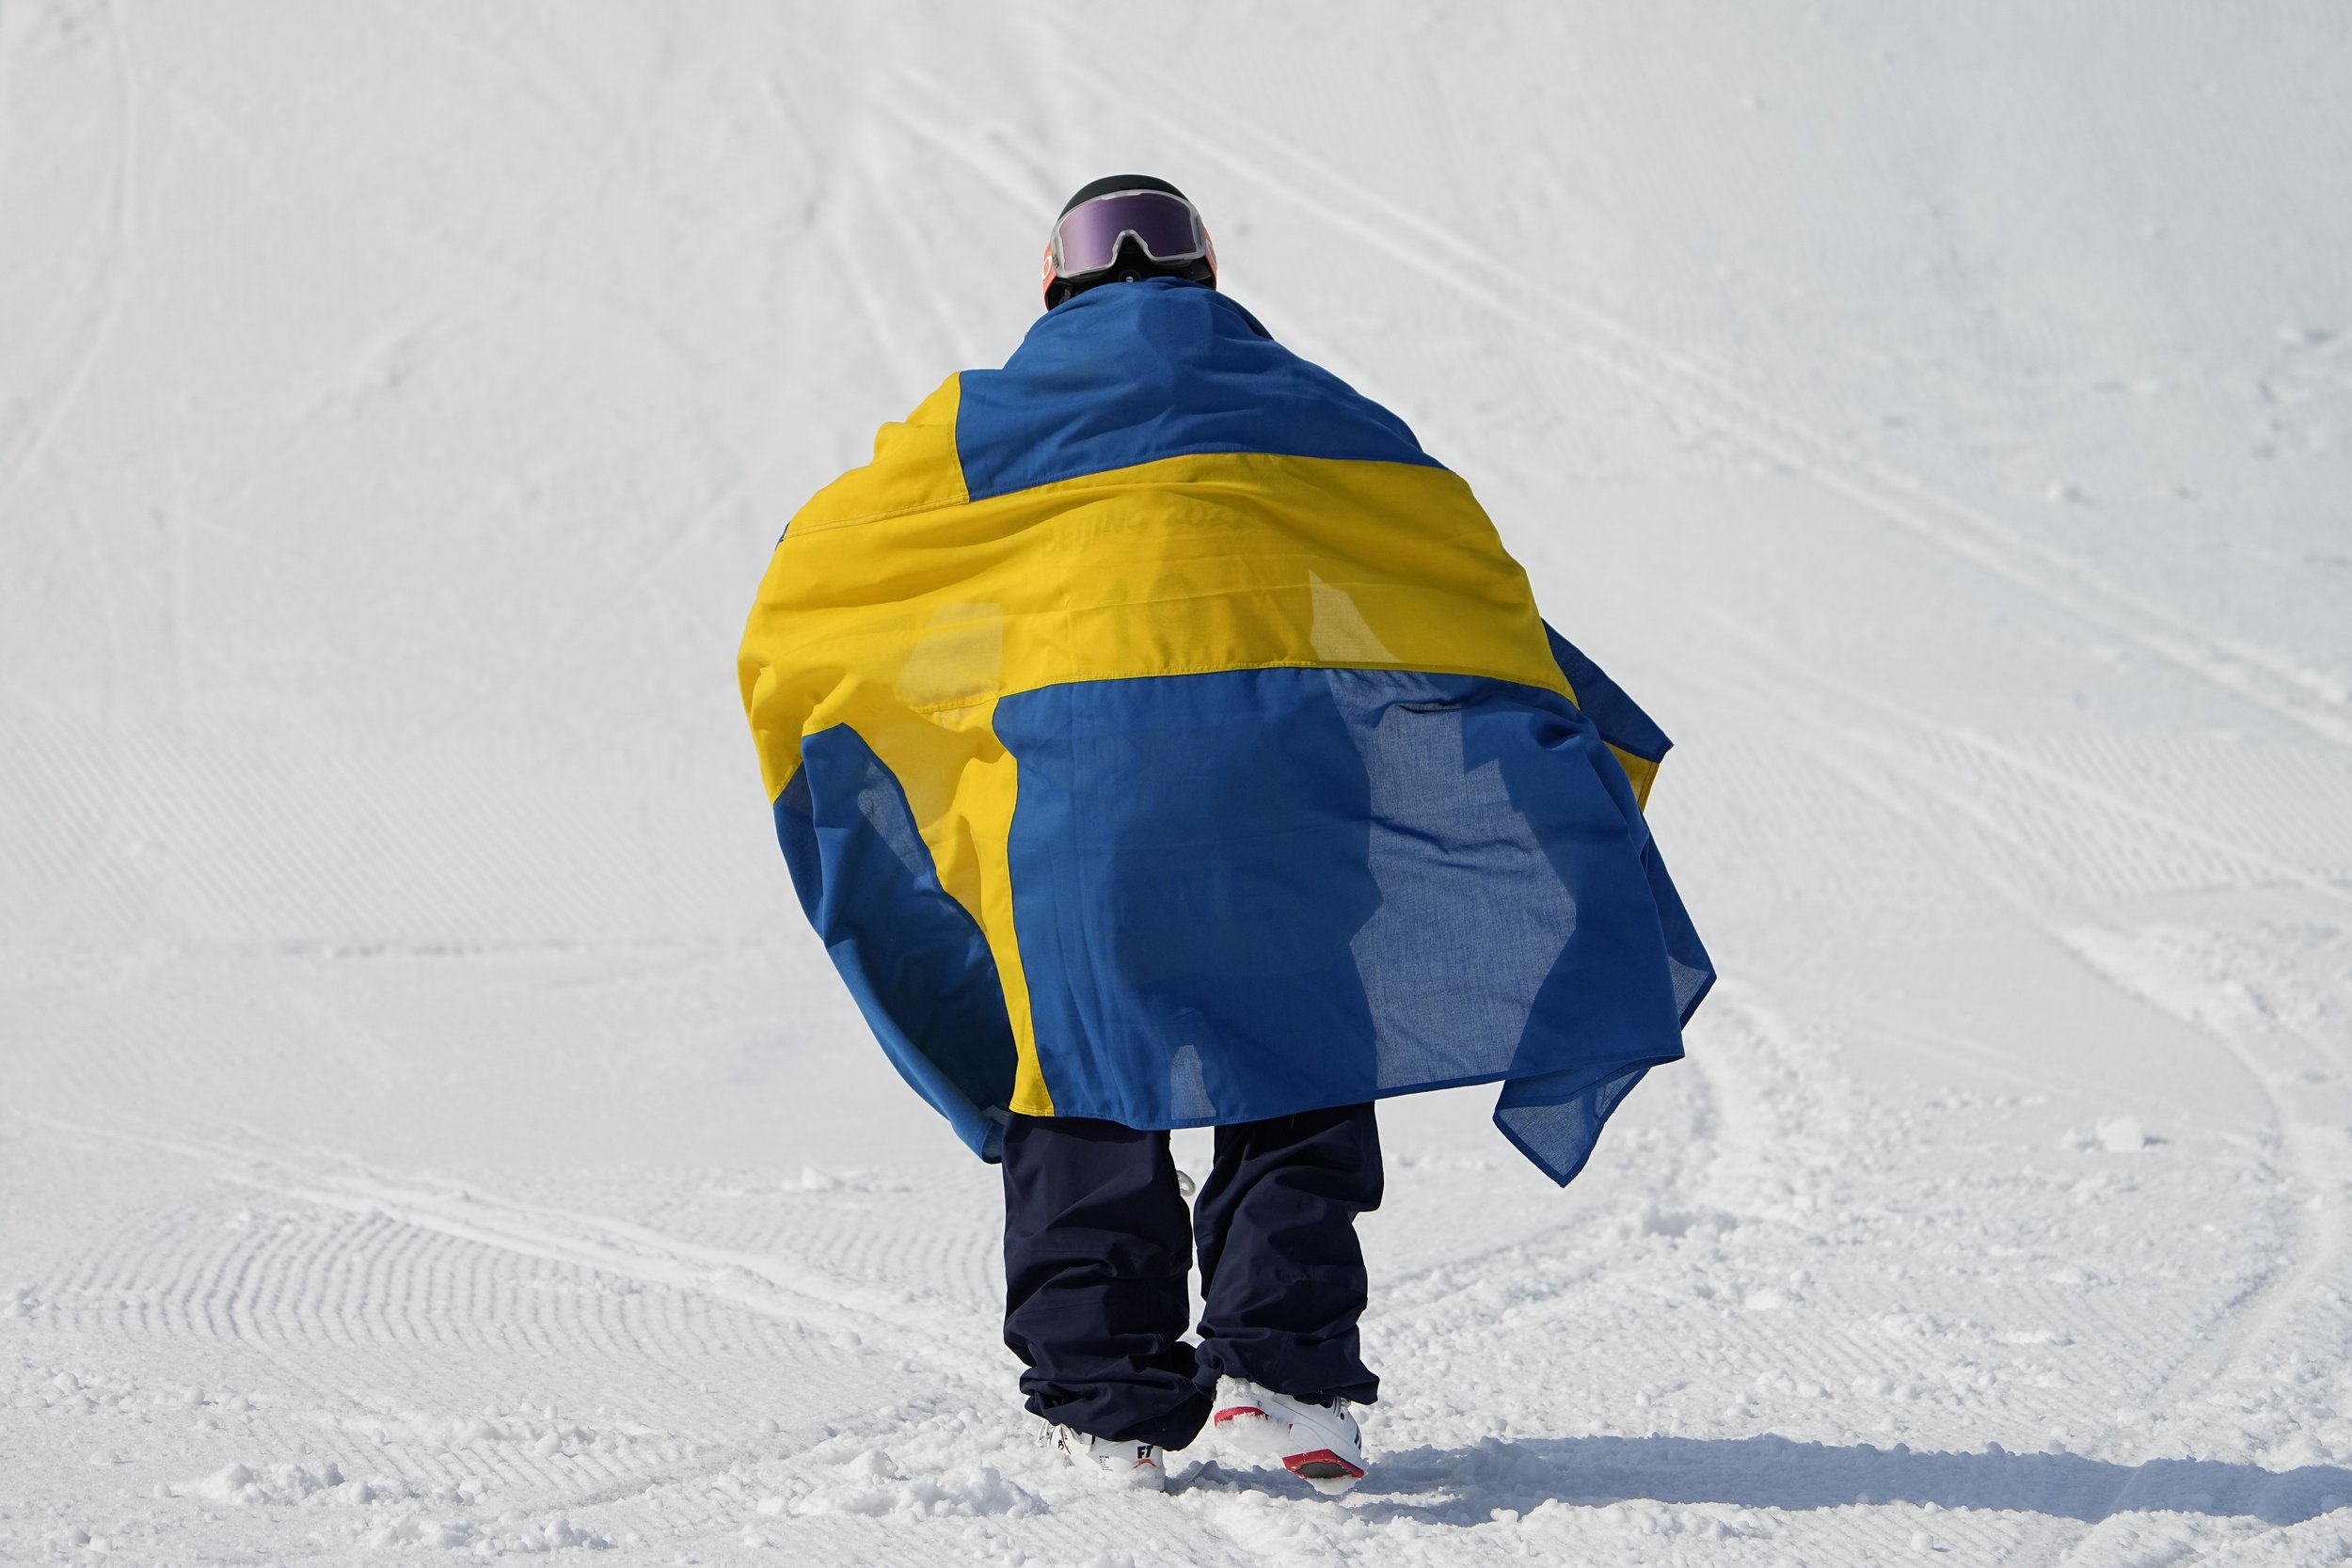  Bronze medal winner Henrik Harlaut of Sweden walks with his country's flag after the men's freestyle skiing big air finals of the 2022 Winter Olympics, Wednesday, Feb. 9, 2022, in Beijing. (AP Photo/Jae C. Hong) 